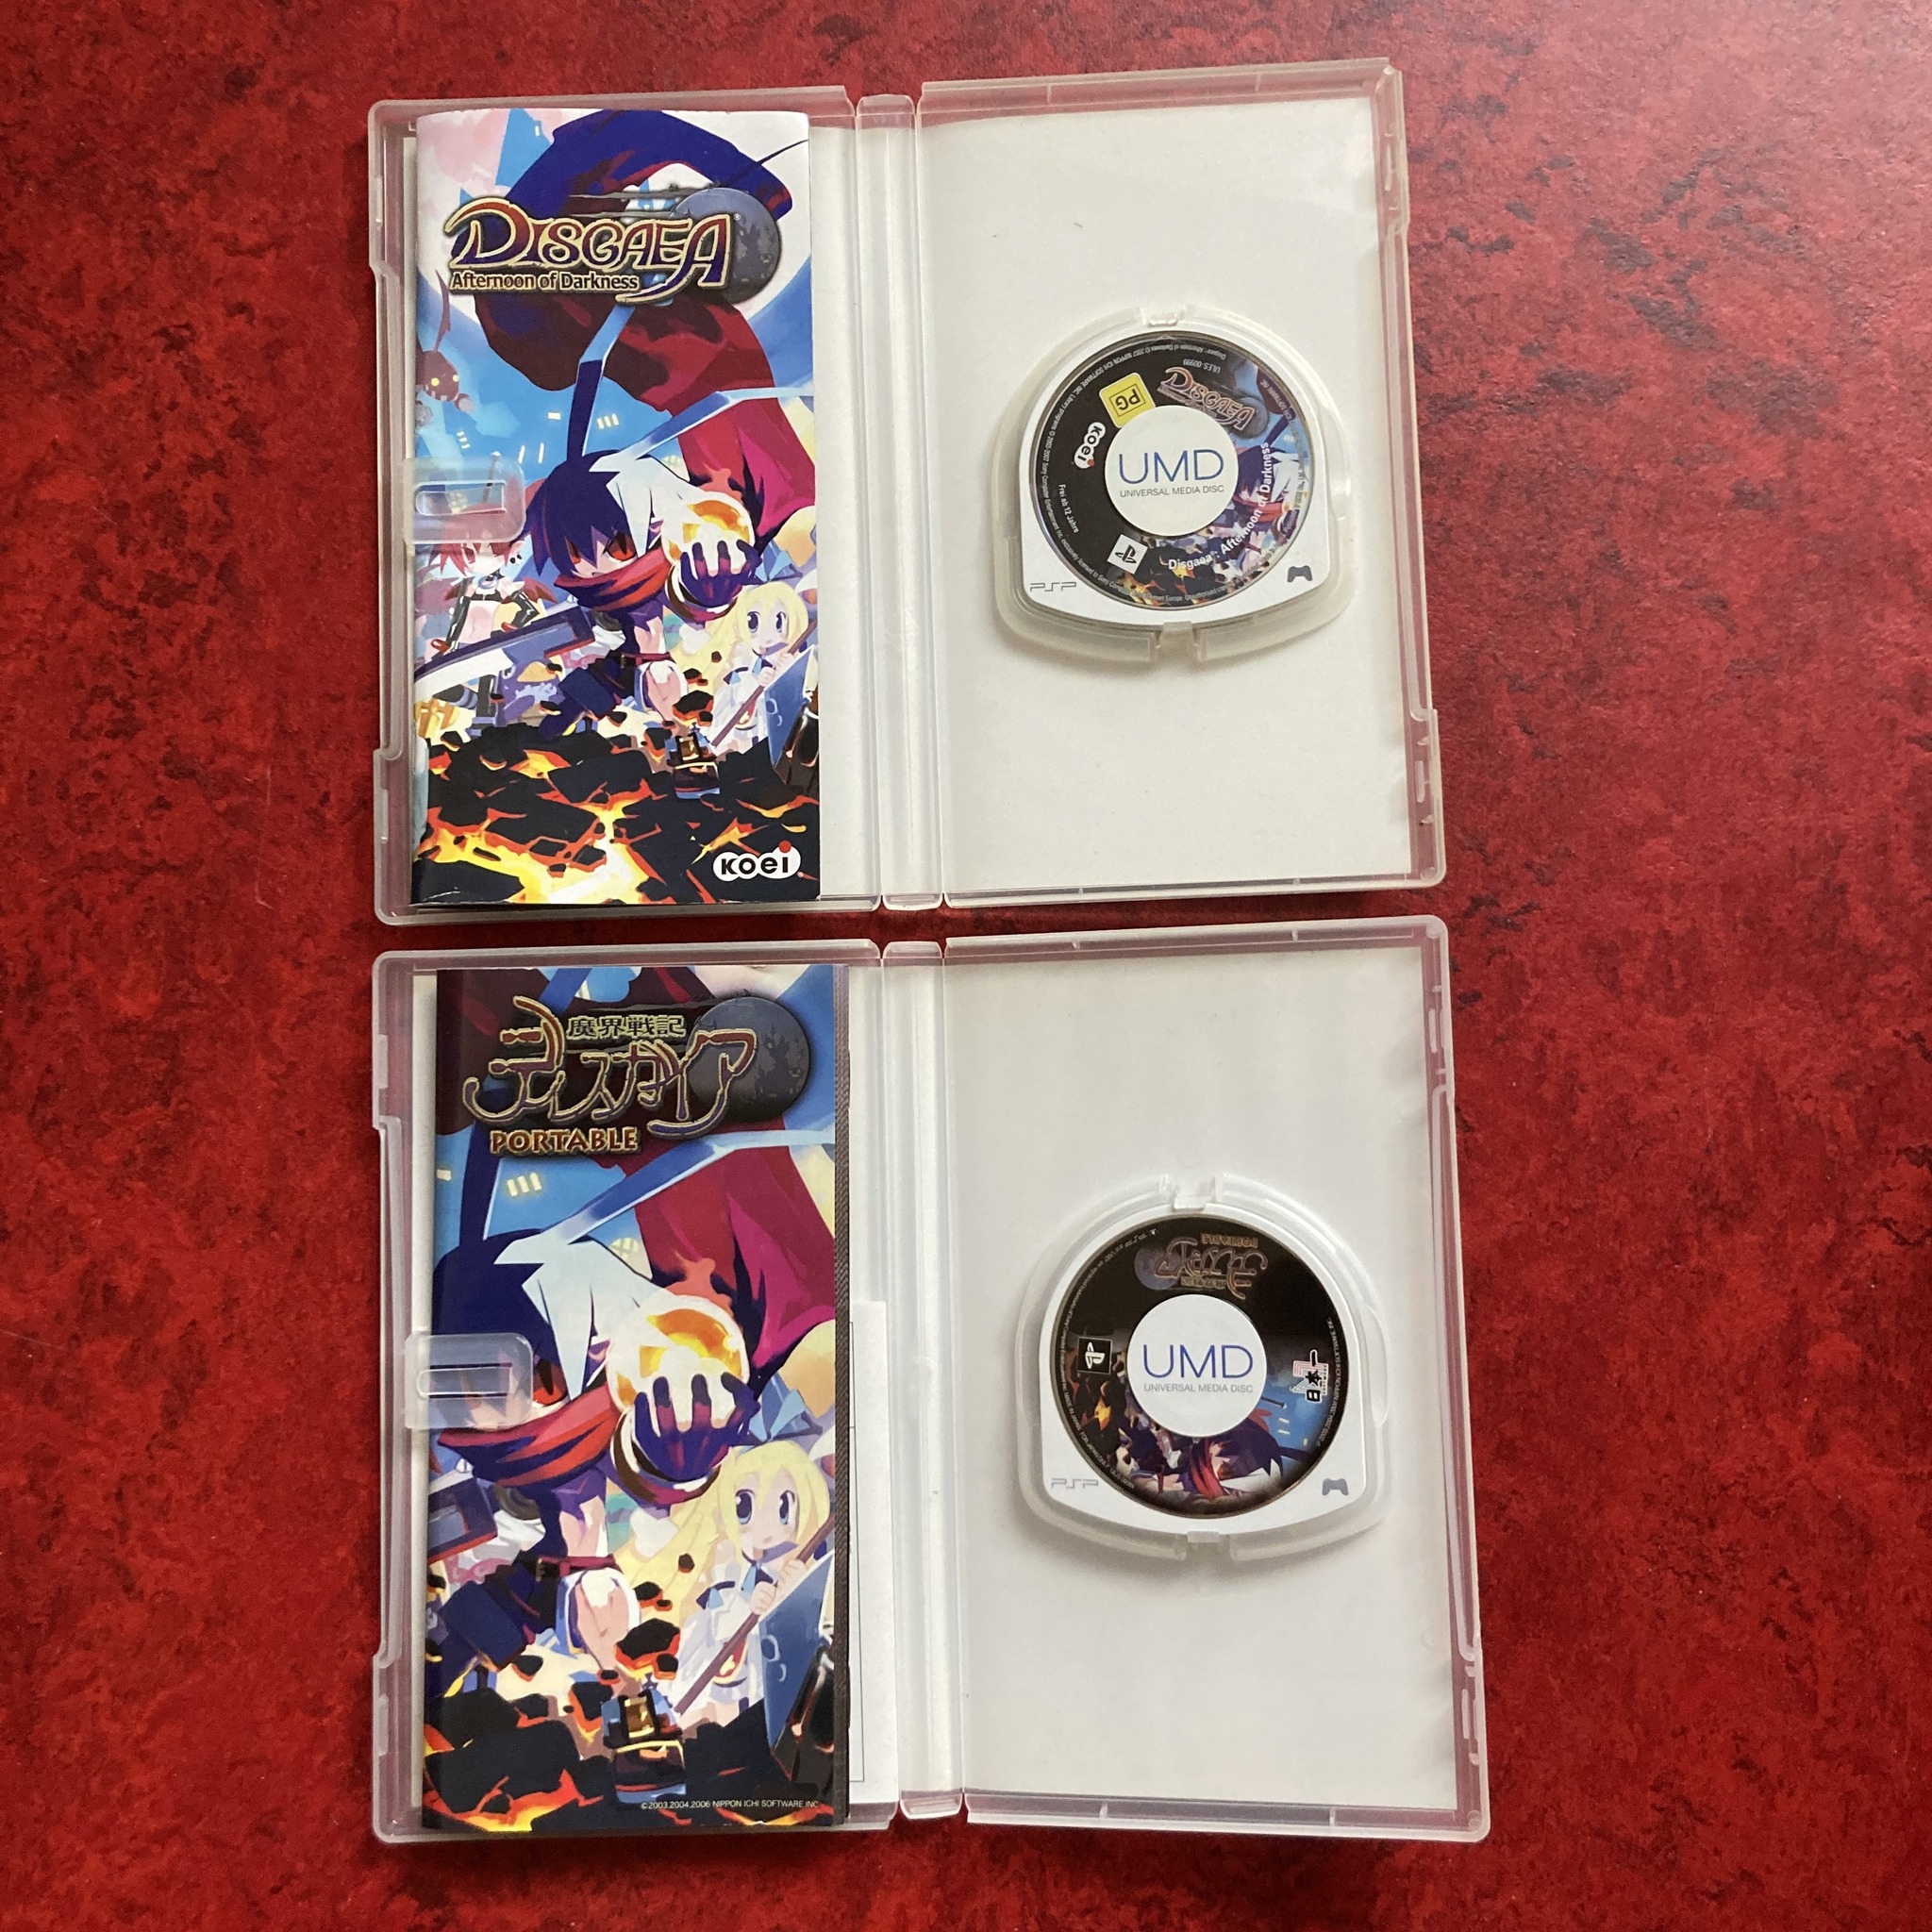 Disgaea PORTABLE / Disgaea: Afternoon of Darkness (PSP)